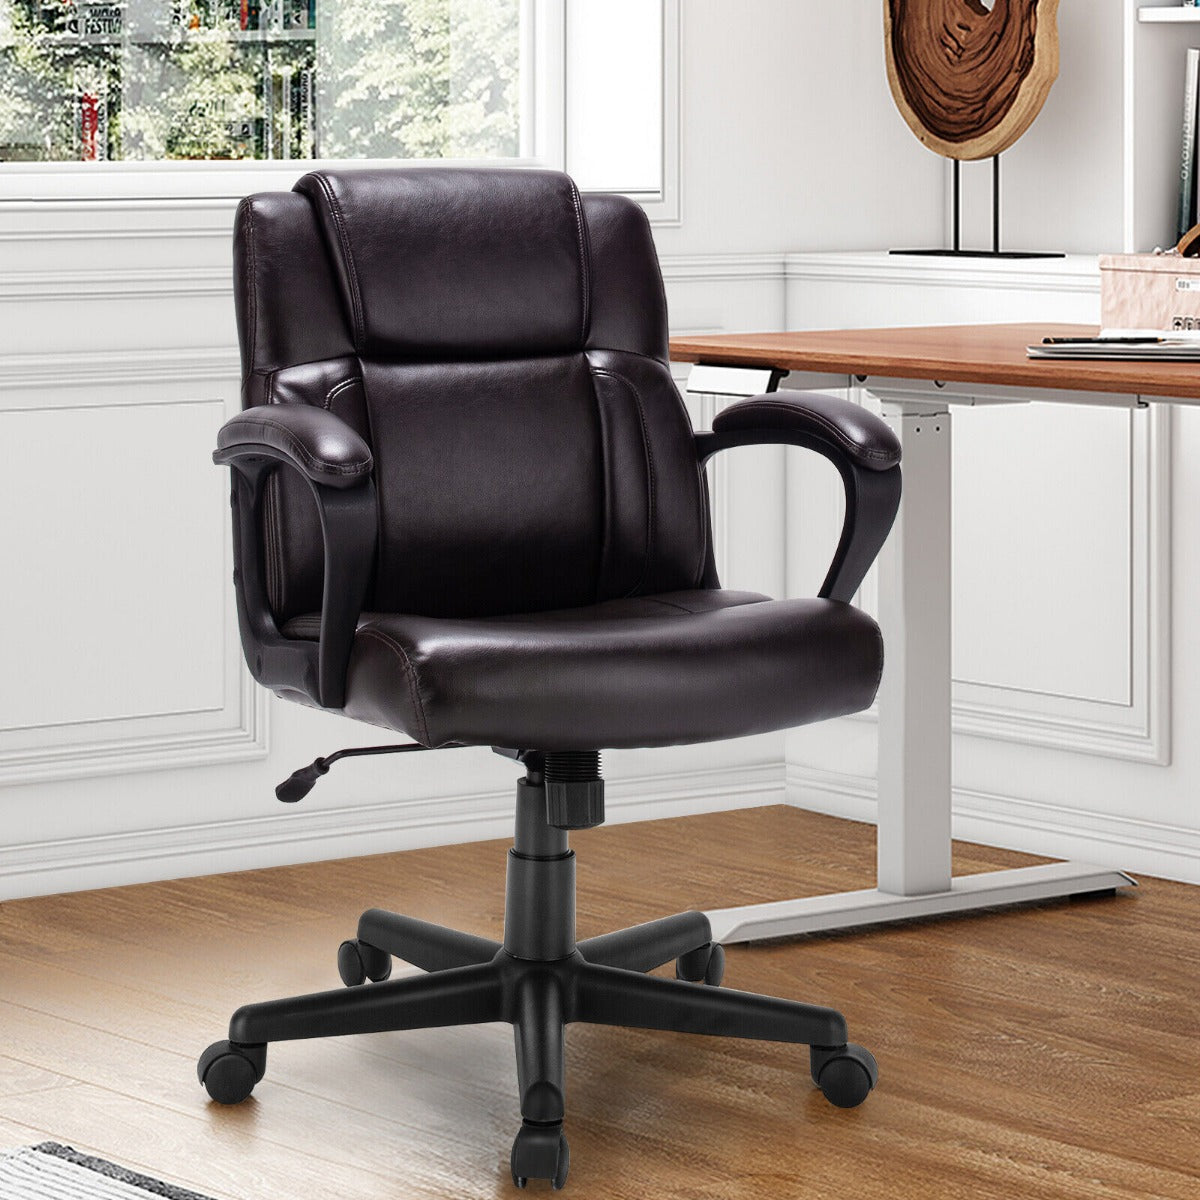 Modern Mid-Back PU Leather Office Chair with Adjustable Height